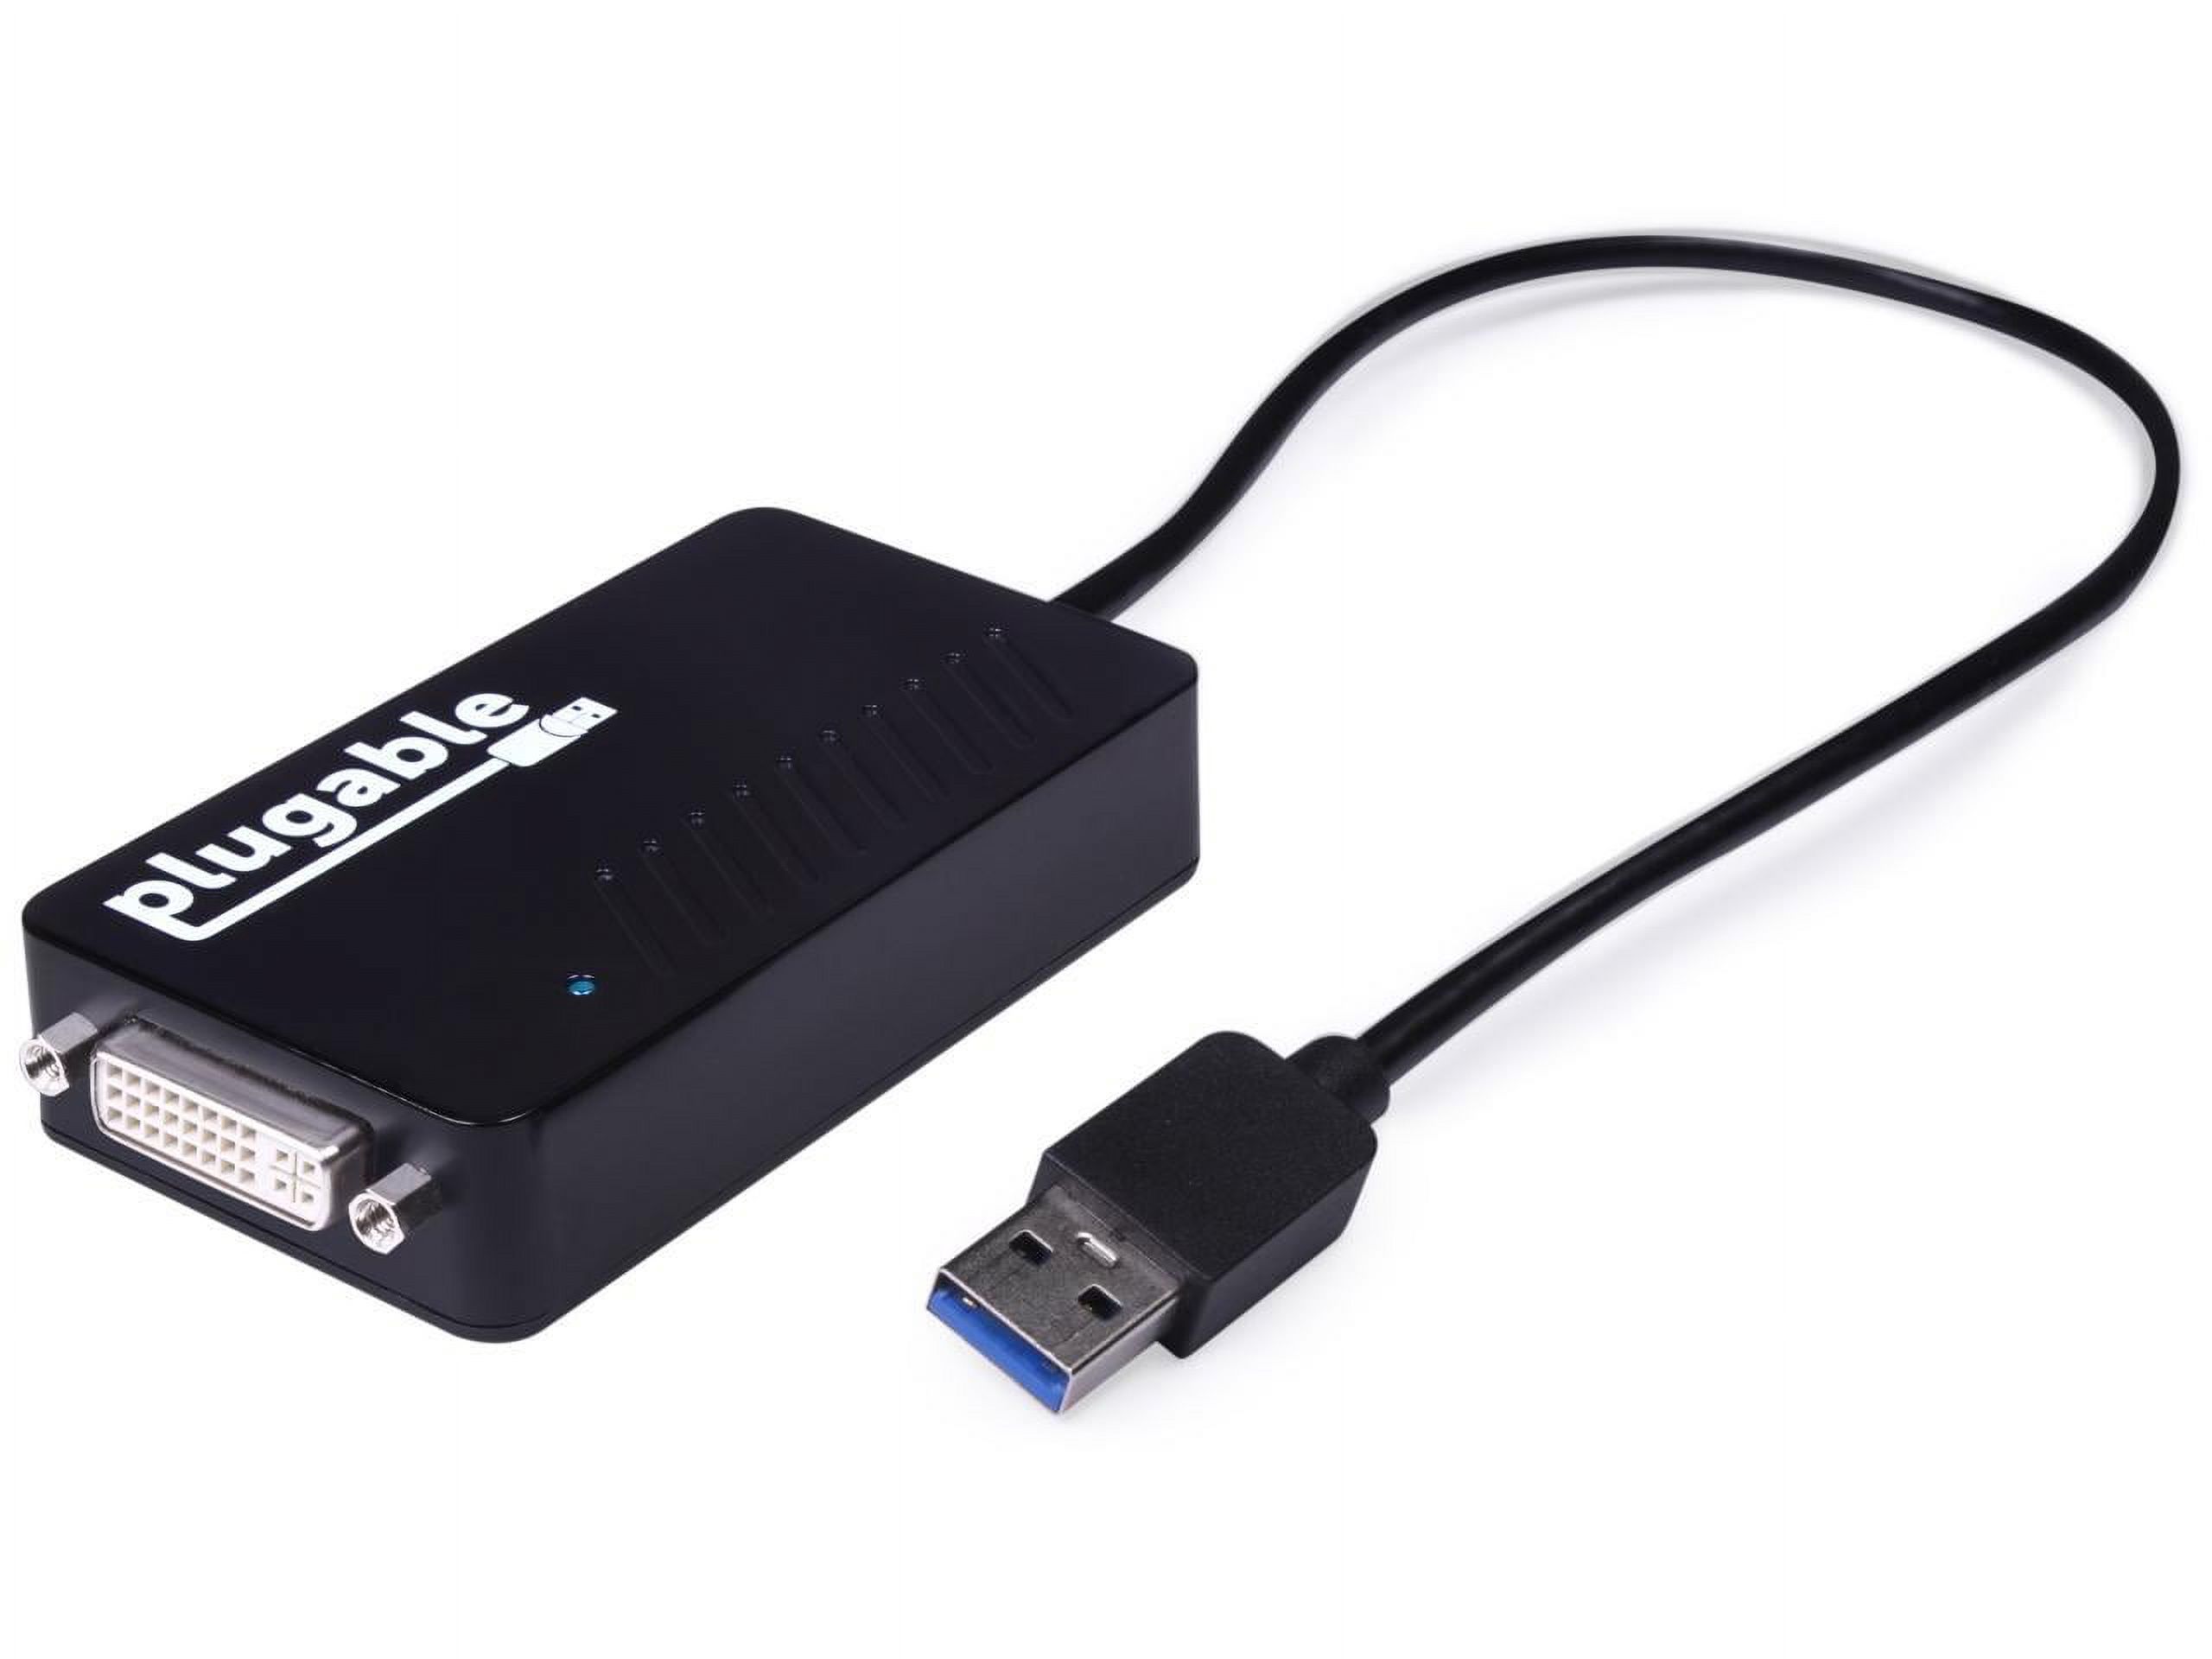 Plugable USB 3.0 to DVI/VGA/HDMI Video Graphics Adapter for Multiple Monitors up to 2048x1152 Supports Windows 11, 10, 8.1, 7, XP, and Mac 10.14+ - image 1 of 8